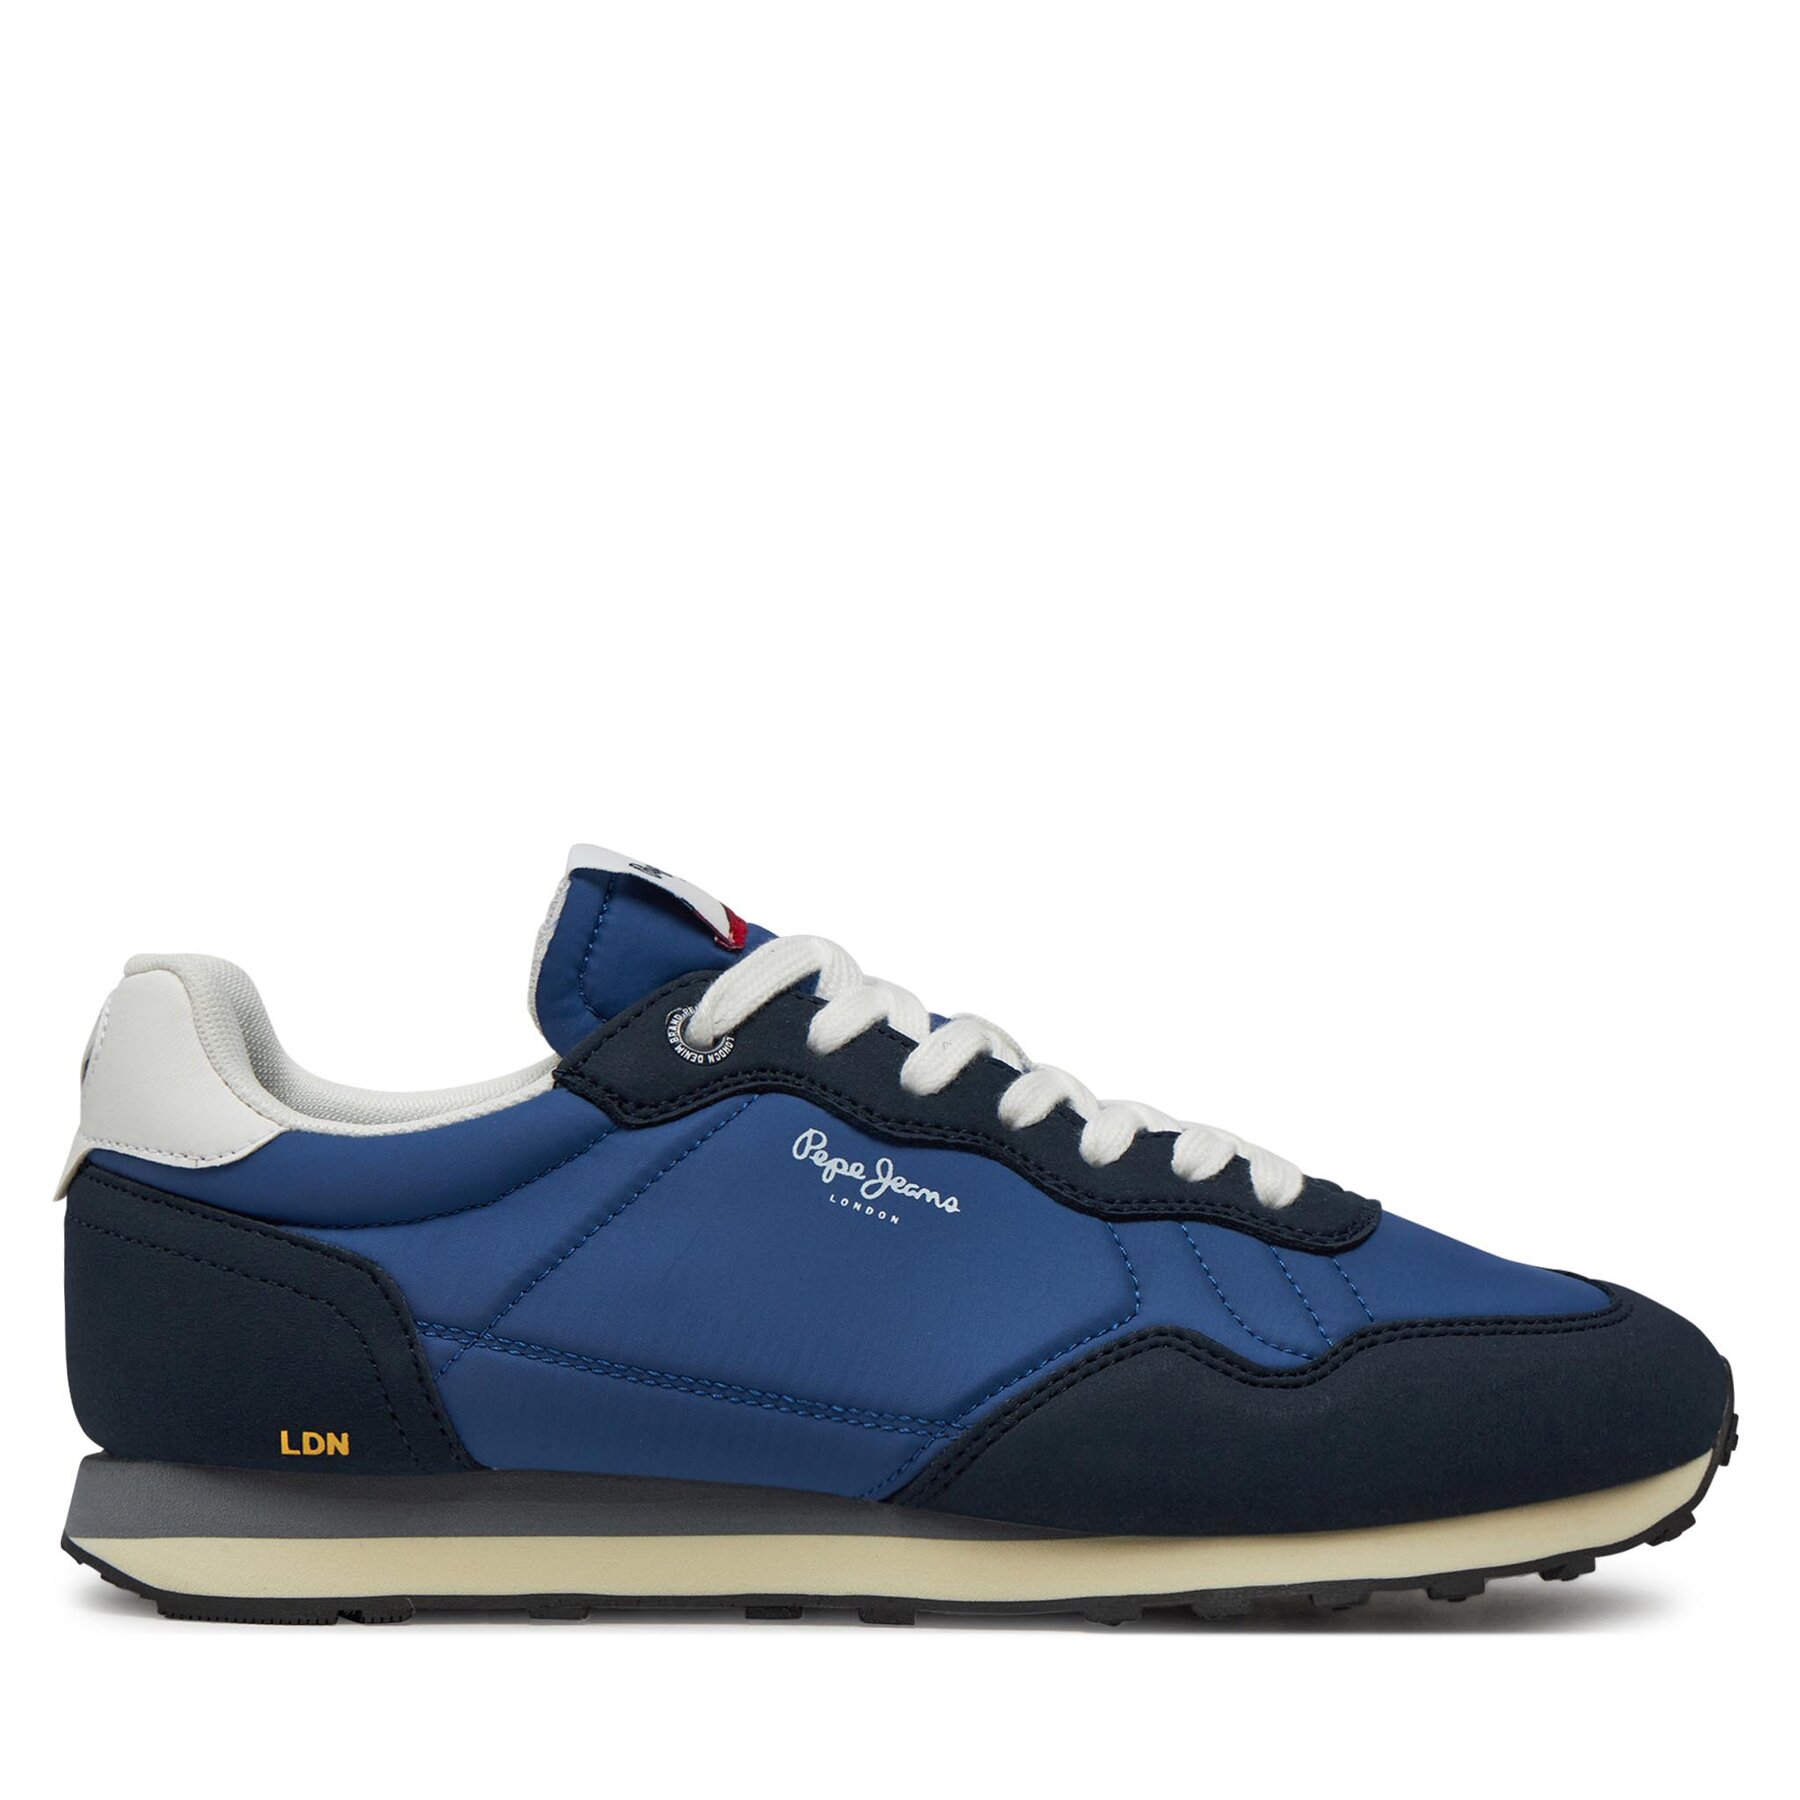 Sneakers Pepe Jeans Natch Basic M PMS40010 Union Blue 562 von Pepe Jeans